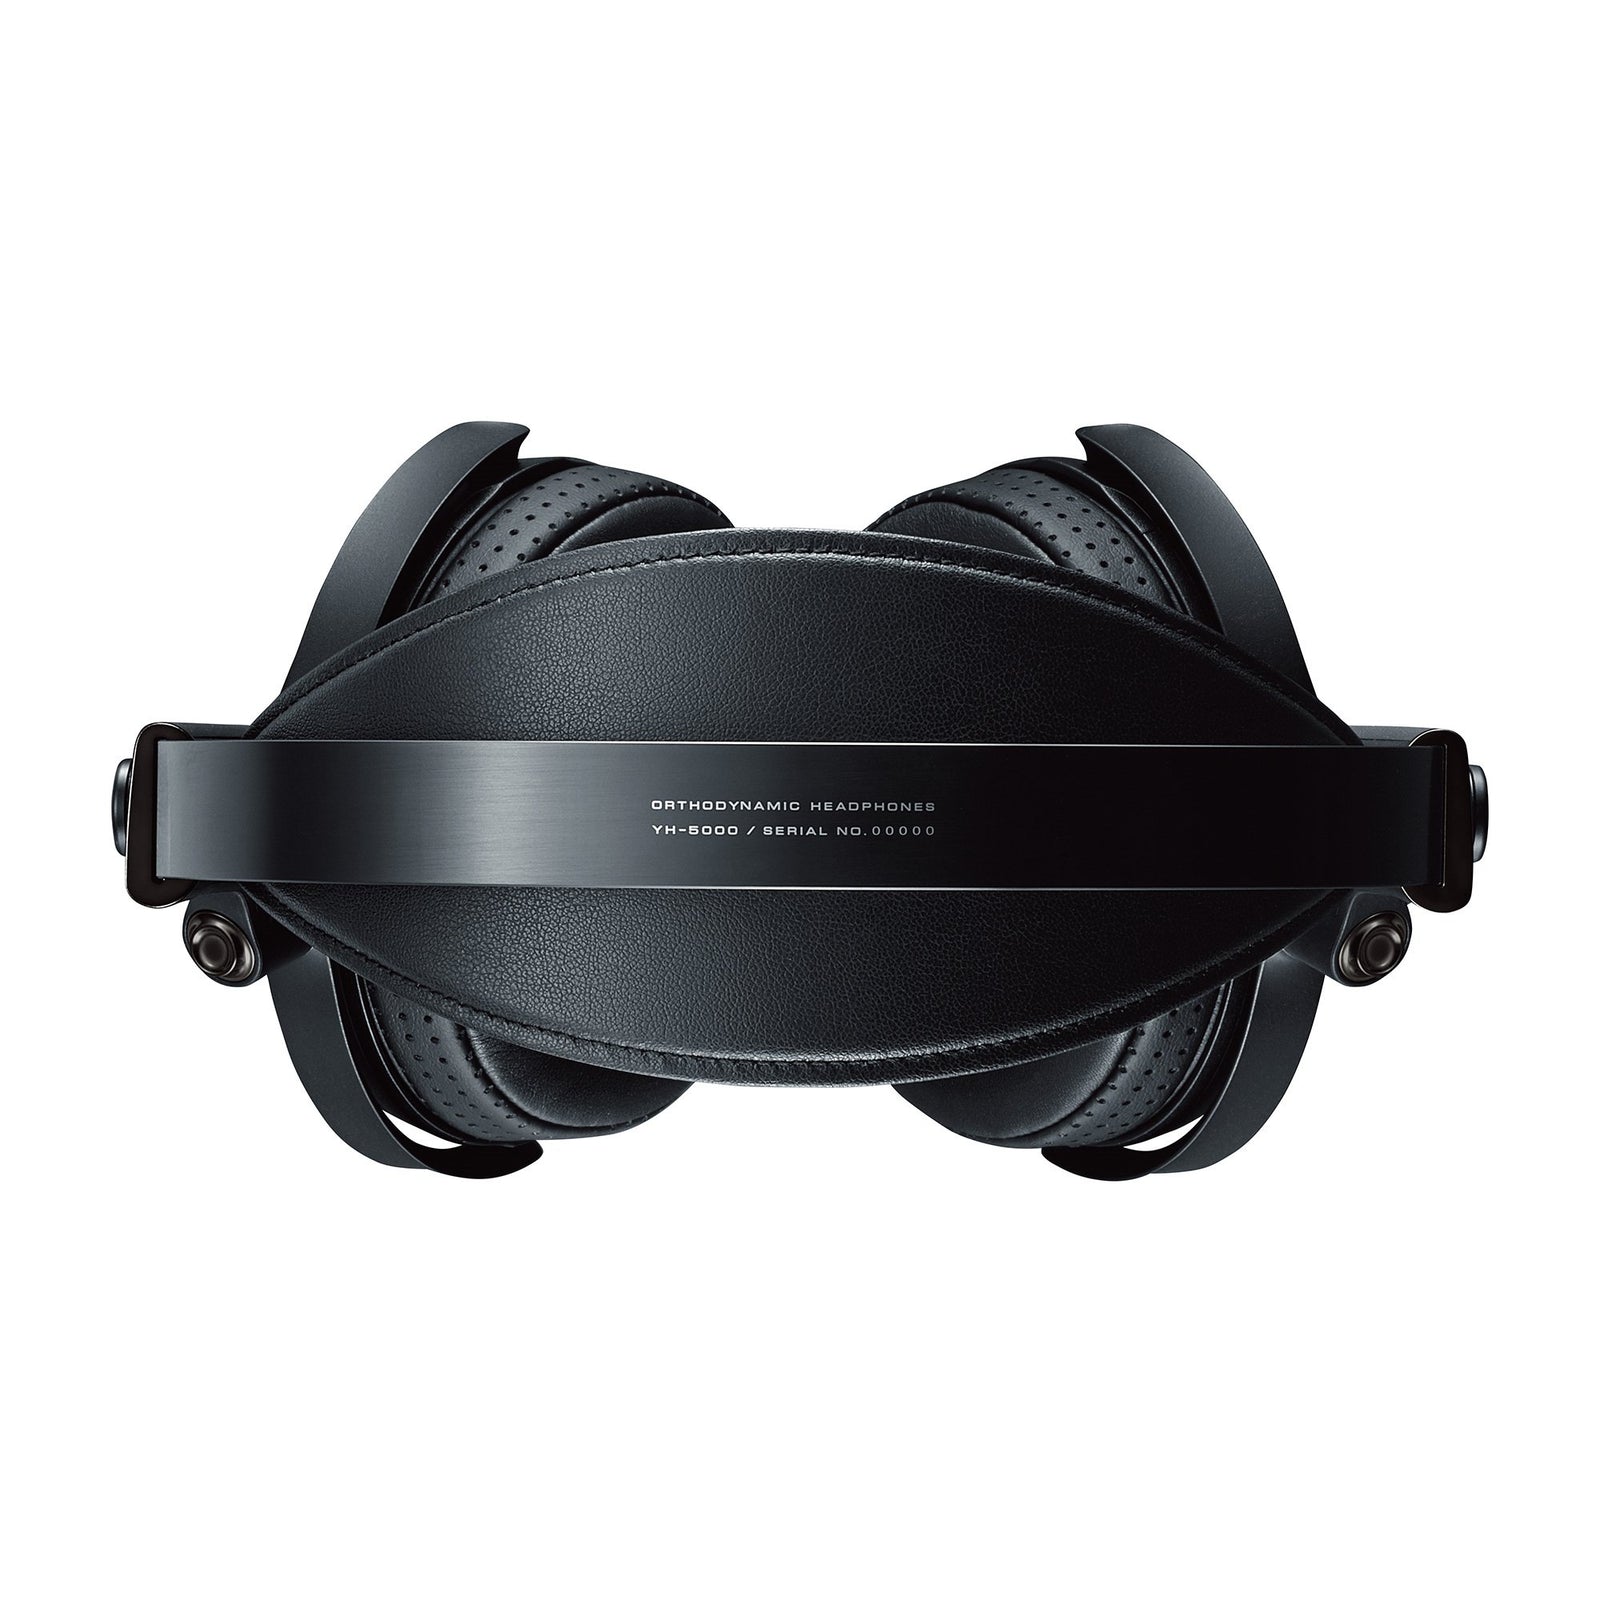 Yamaha YH5000SE - Headphones Flagship Headphone that offers ultimate True Sound using an ORTHODYNAMIC™ driver. Yamaha True Sound allows you to immerse yourself in a world of sound and music Yamaha ORTHODYNAMIC™ driver provides sonic accuracy and enables ultra-responsive performance Ultra-lightweight